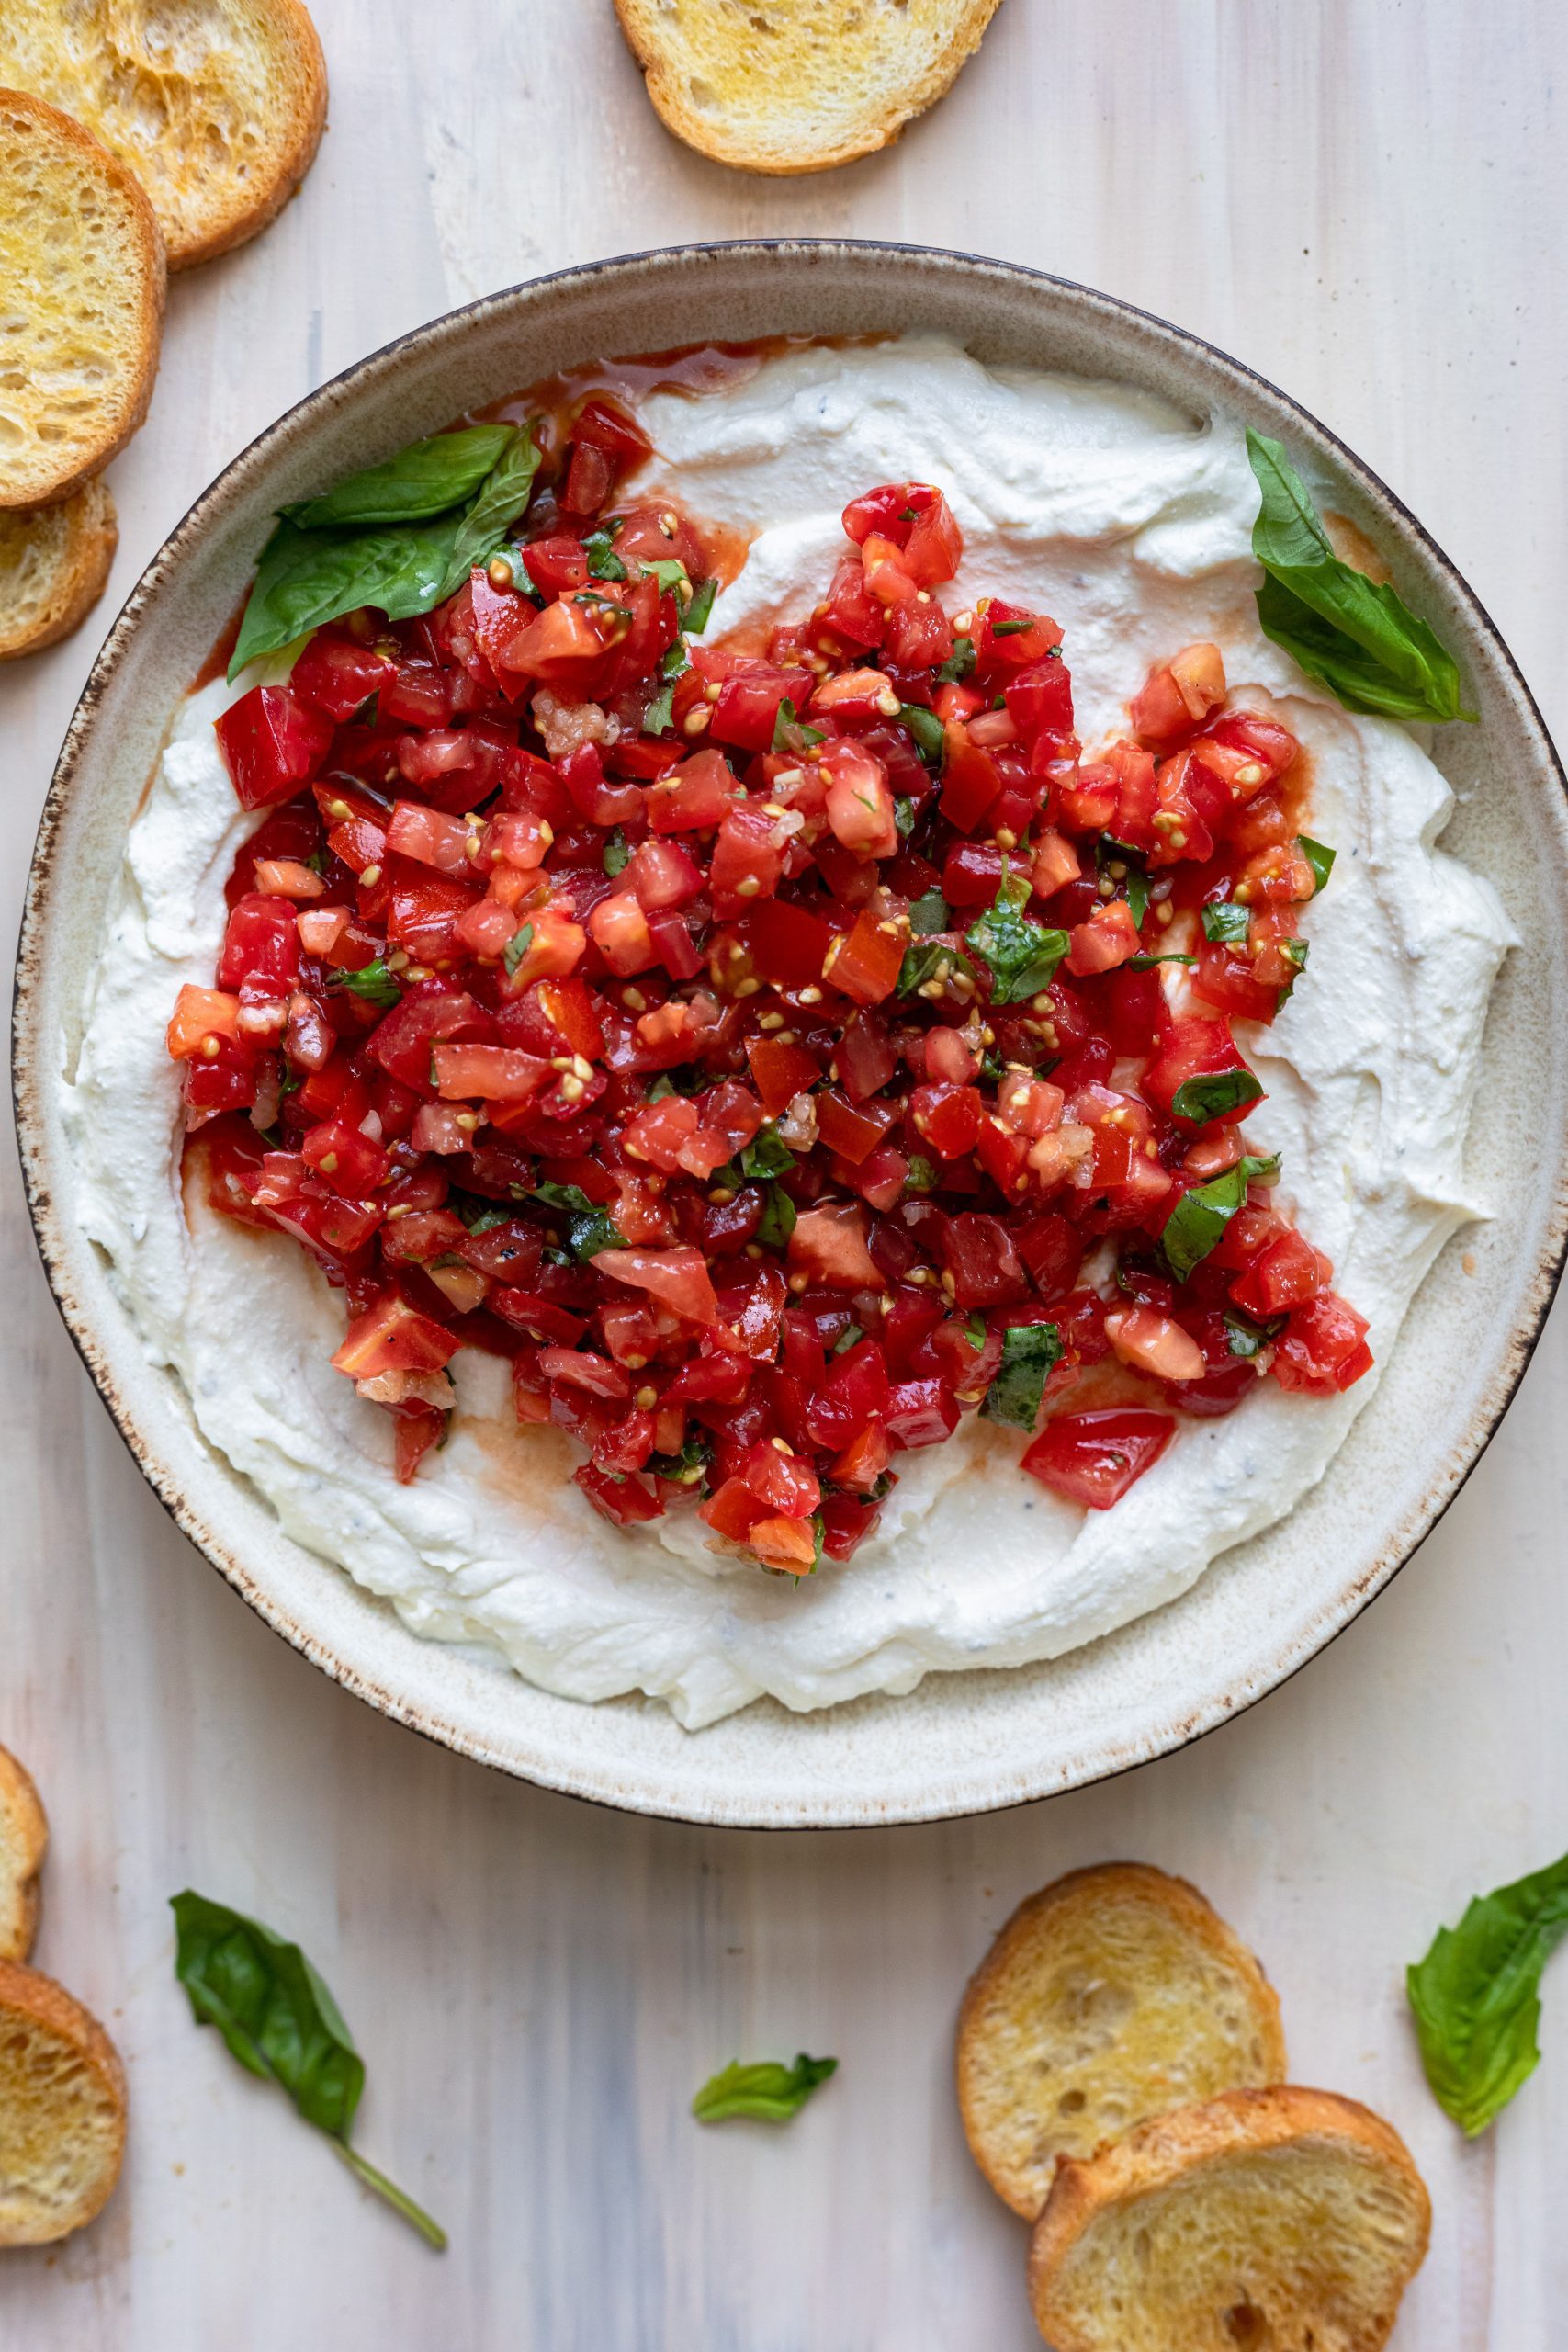 Bowl of Whipped Ricotta and bruschetta dip on a light wood background with basil leaves and crostini.